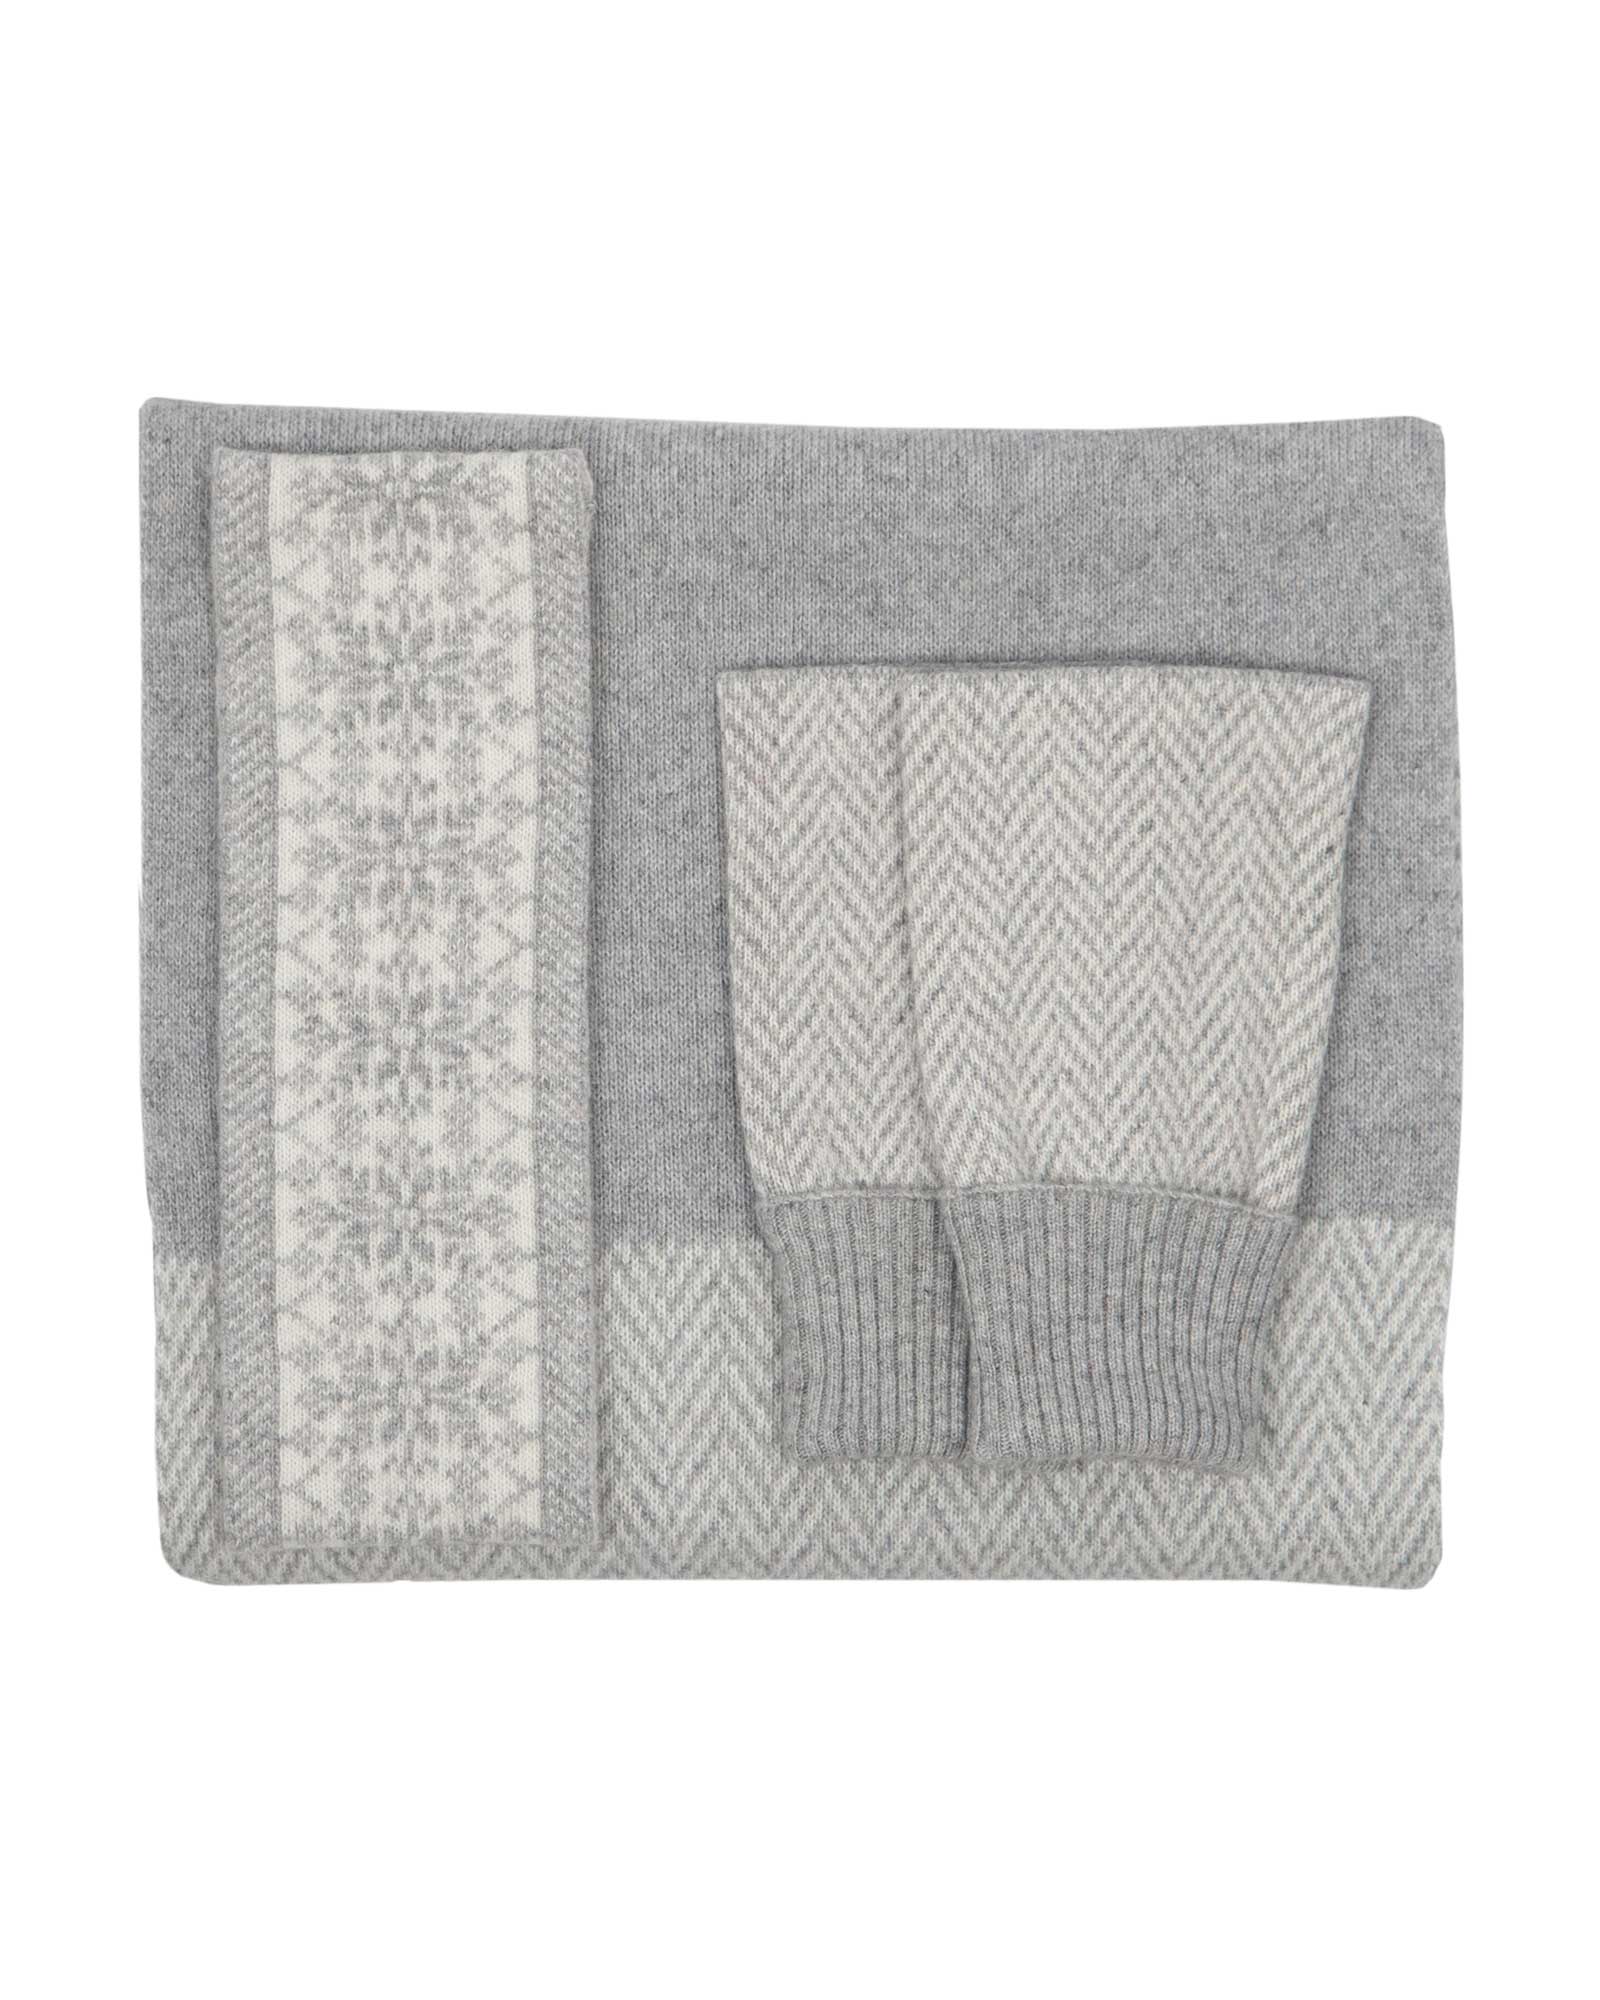 Cashmere Blend Twill Wrist Warmers Silver and White